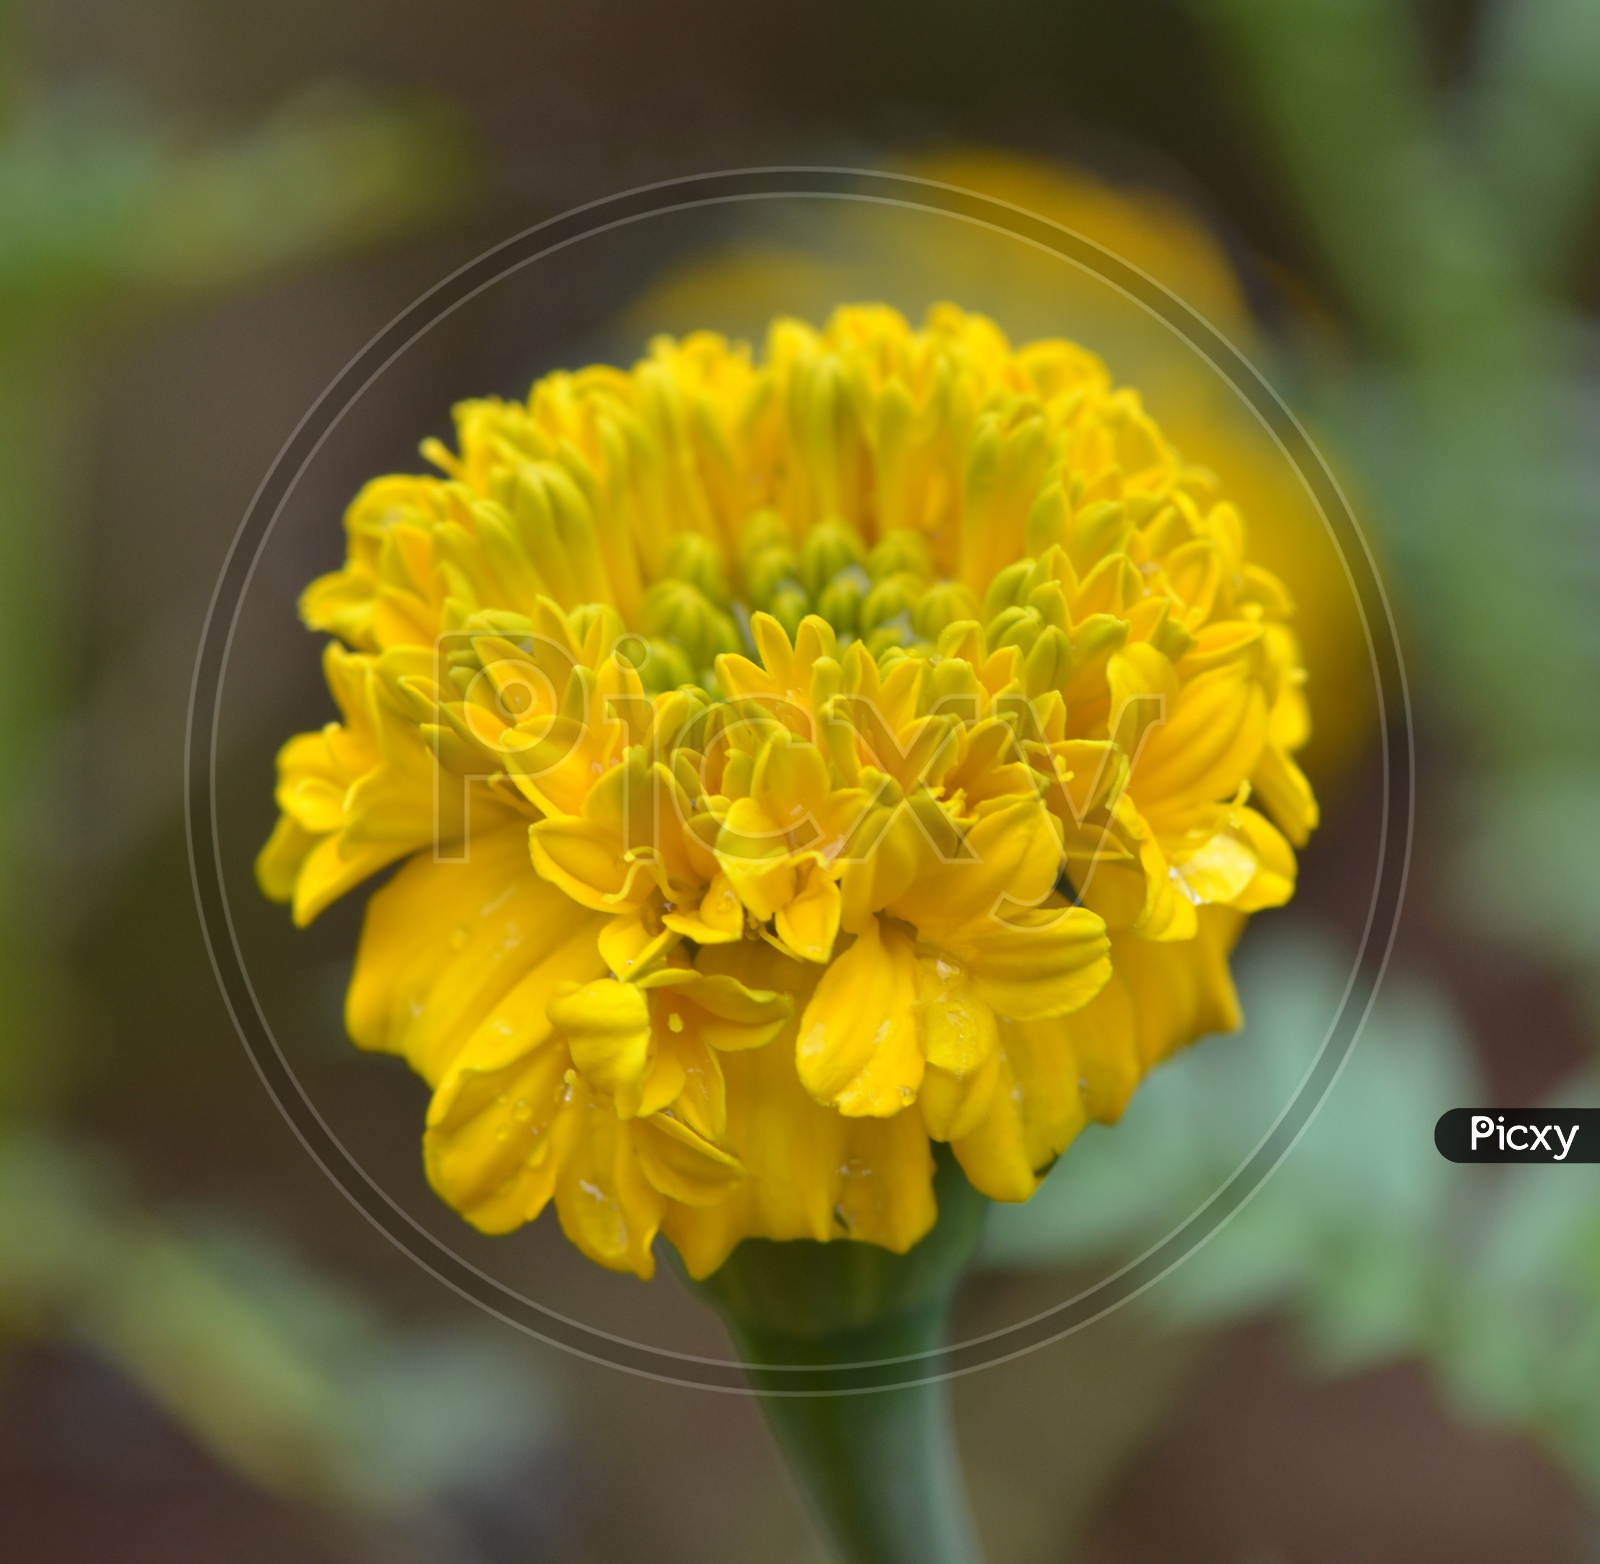 Marigold Flower With Condensed Moist Droplets On Flower  With green Leafs Bokeh Background